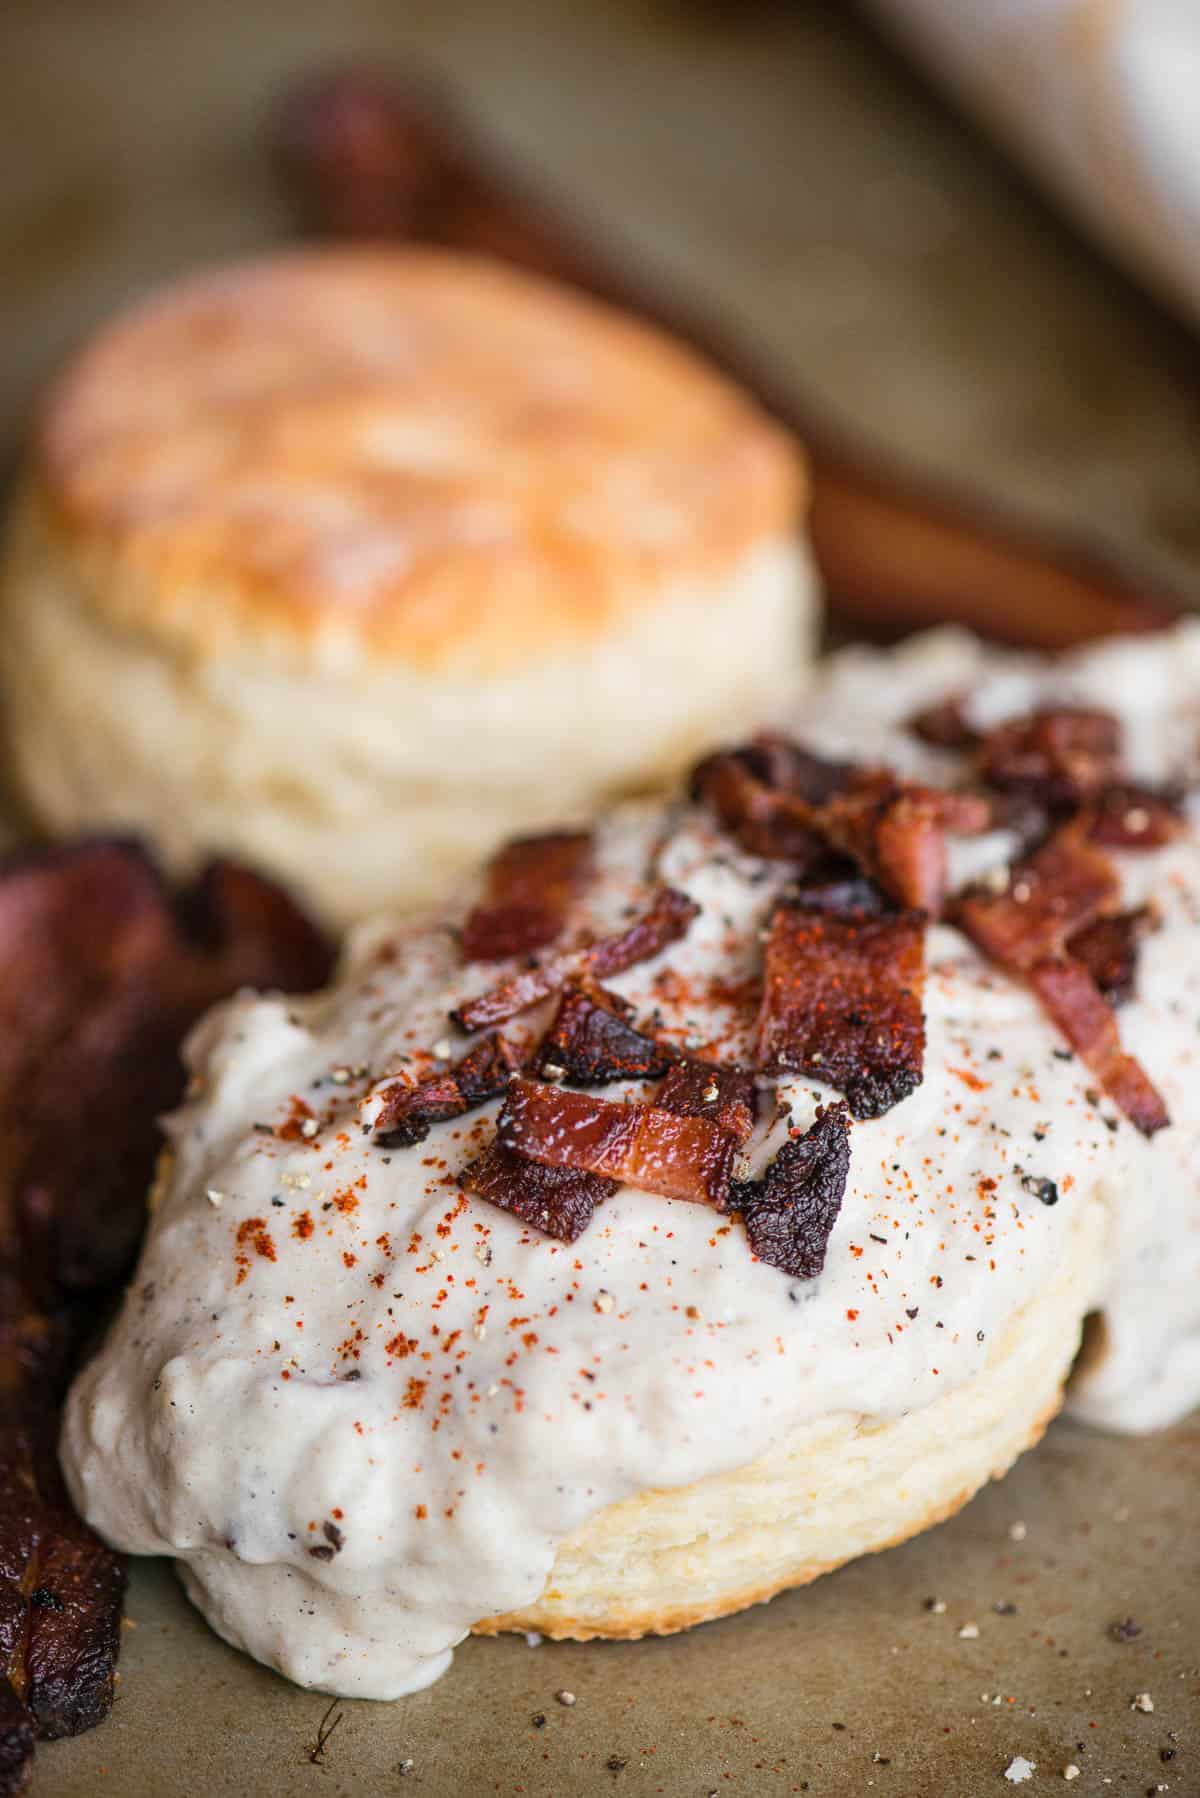 biscuits and bacon gravy.